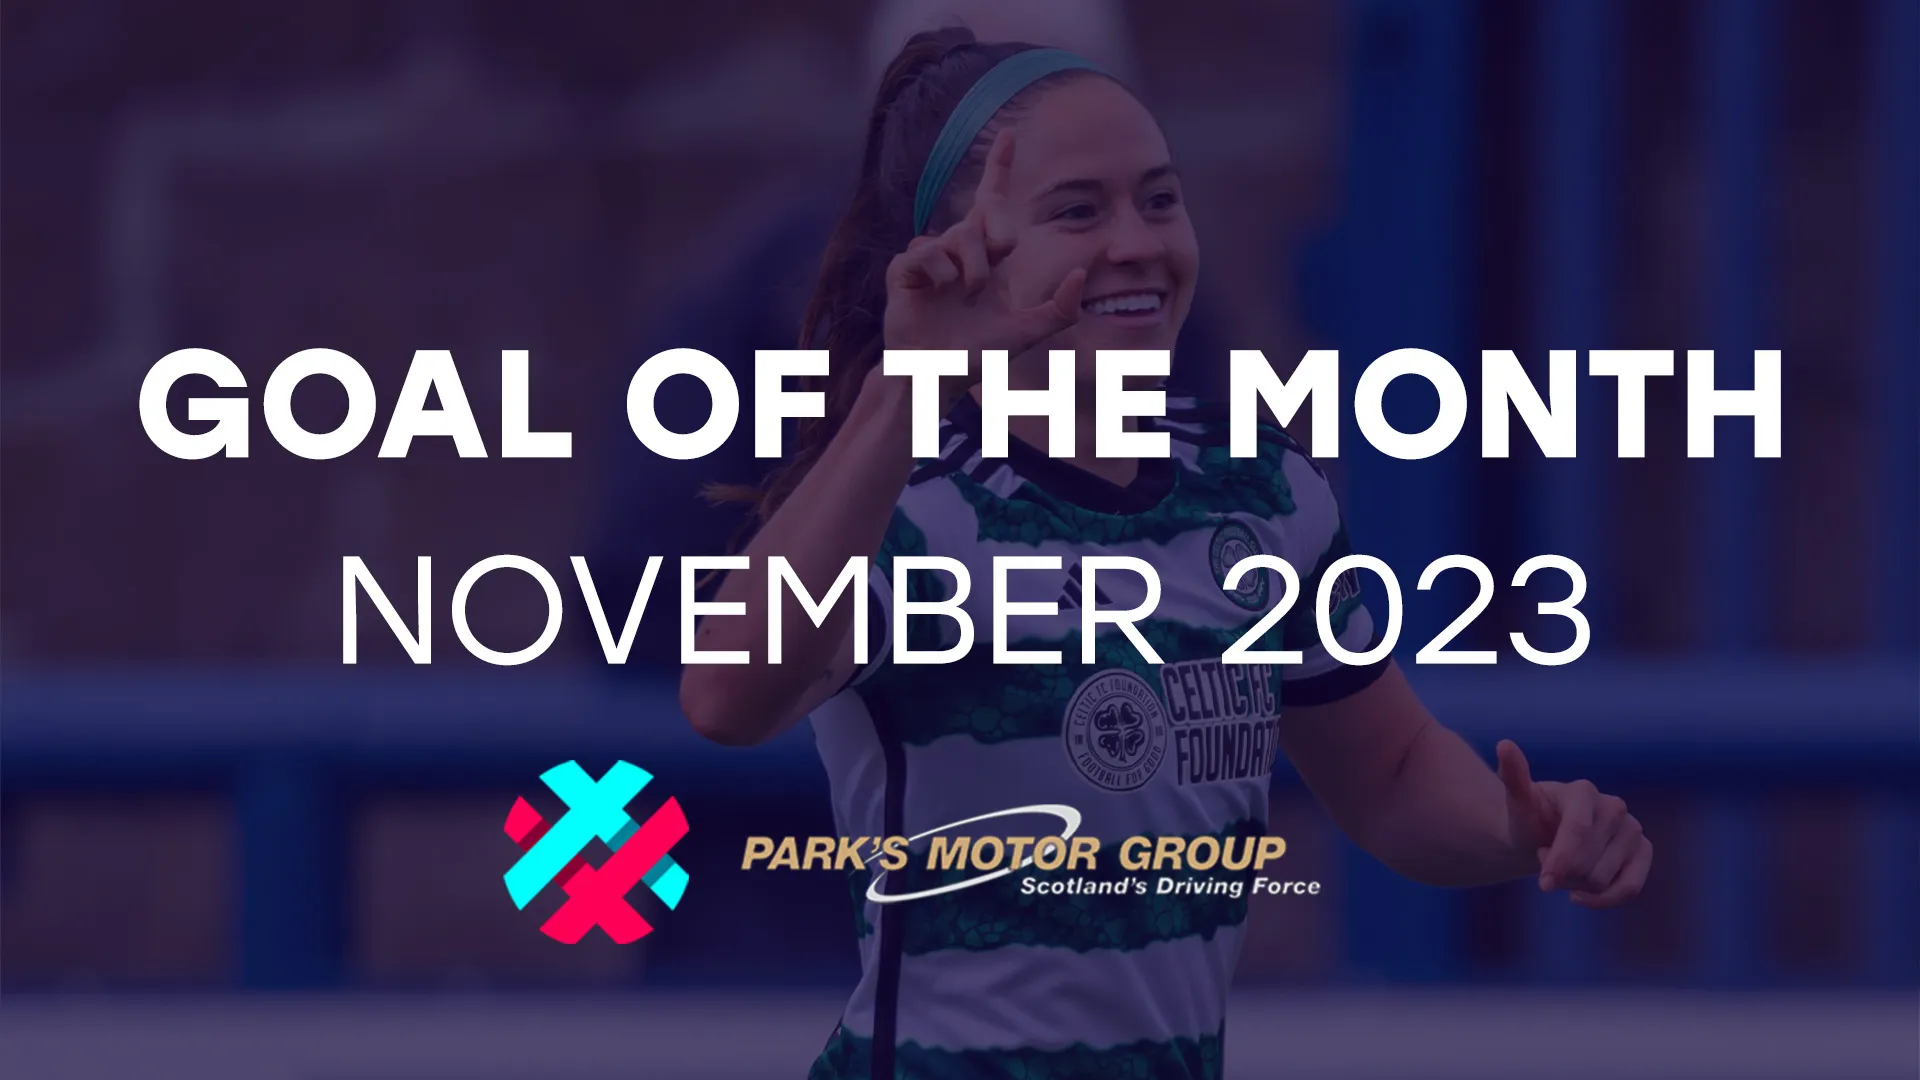 Image for Kit Loferski | SWPL Goal of the Month, November 2023 | Supported by Park’s Motor Group